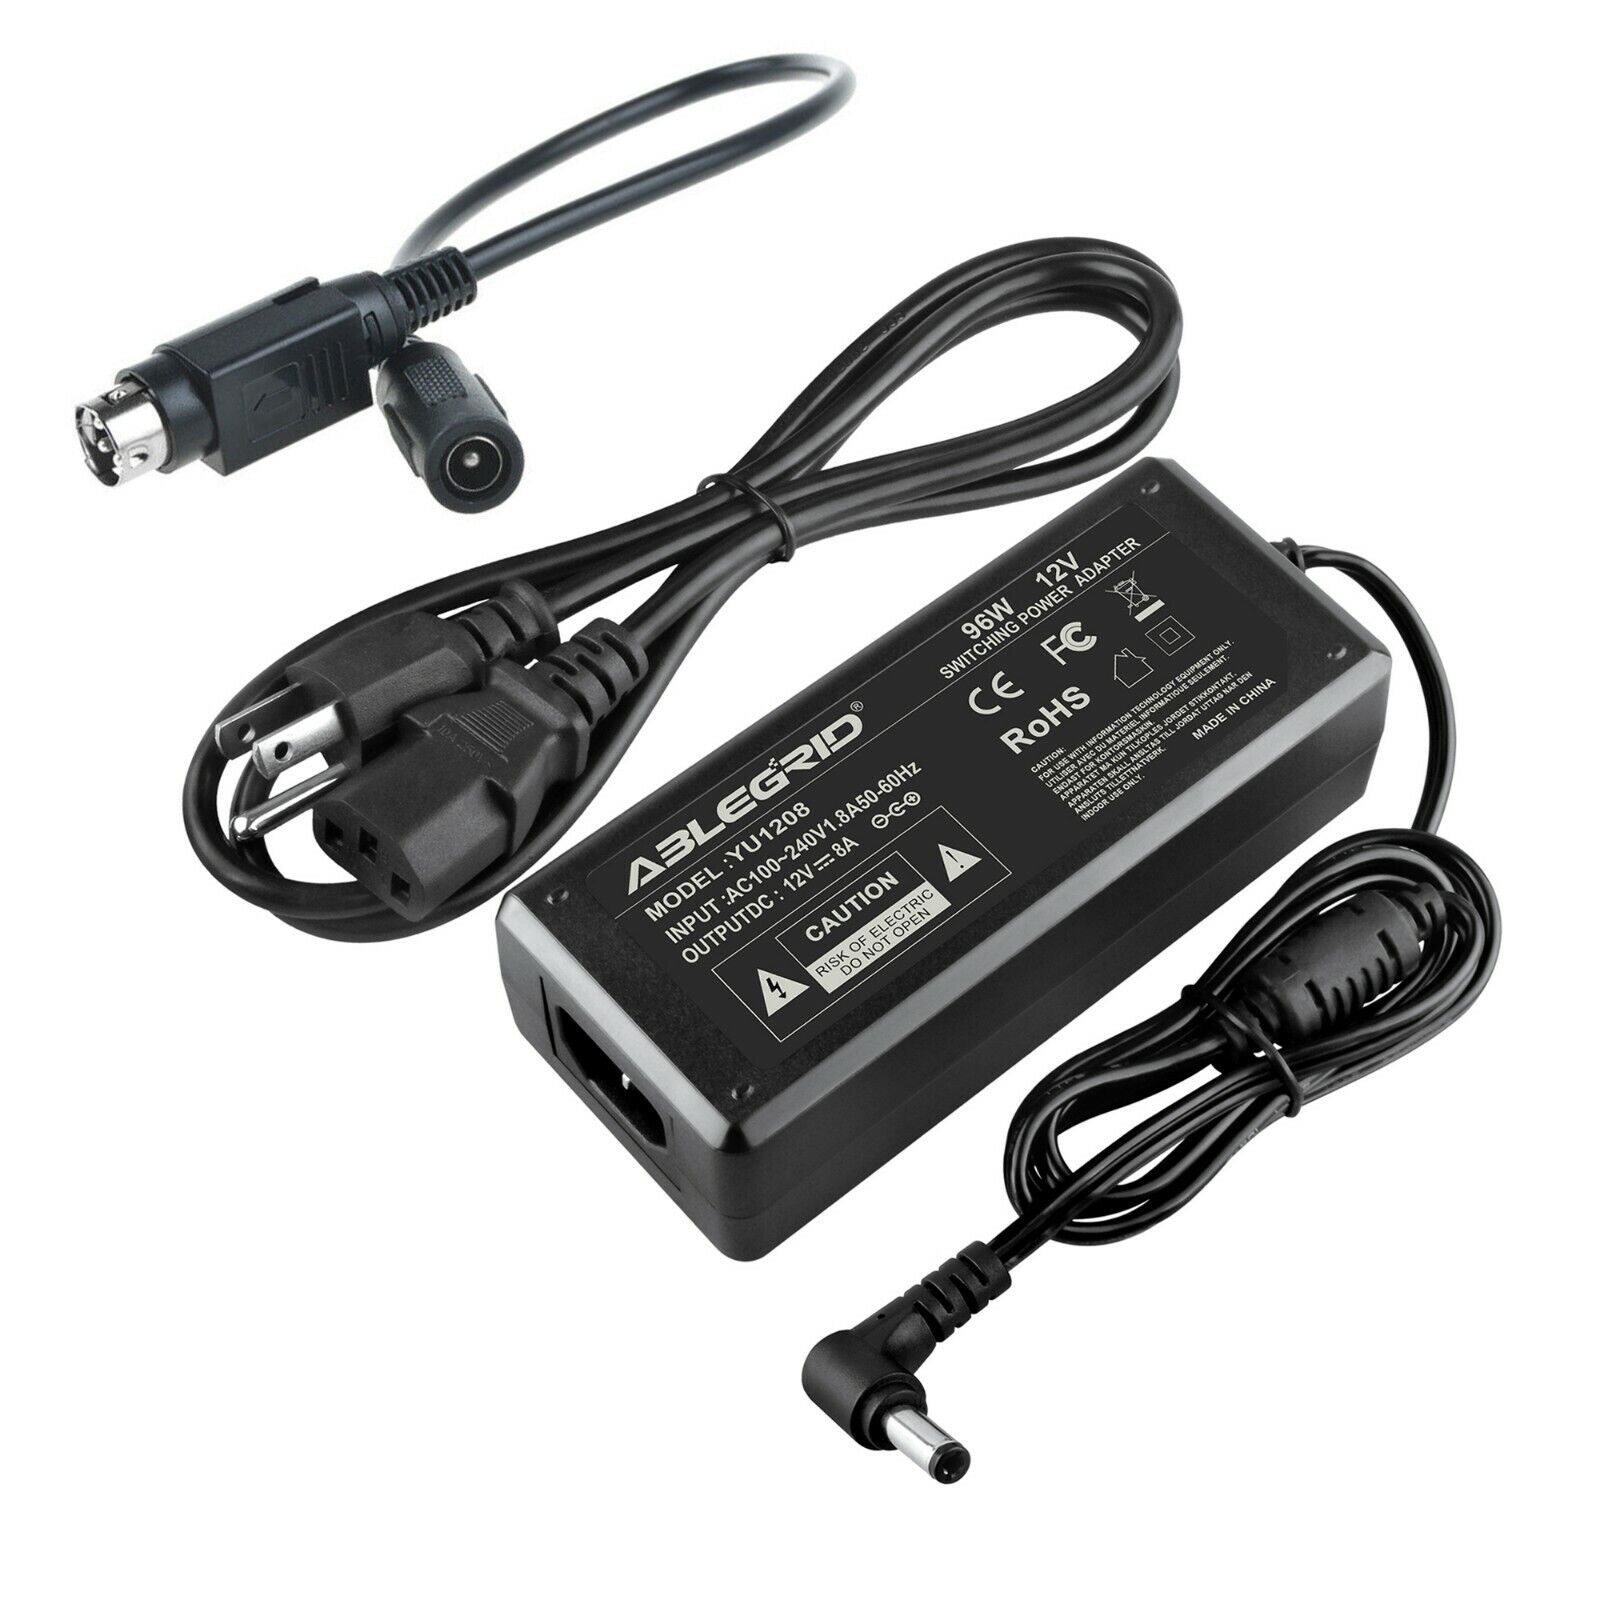 AC Adapter 12V 7.5A 90W 4-PIN DIN For LI SHIN 0219B1280 Power Supply Charger